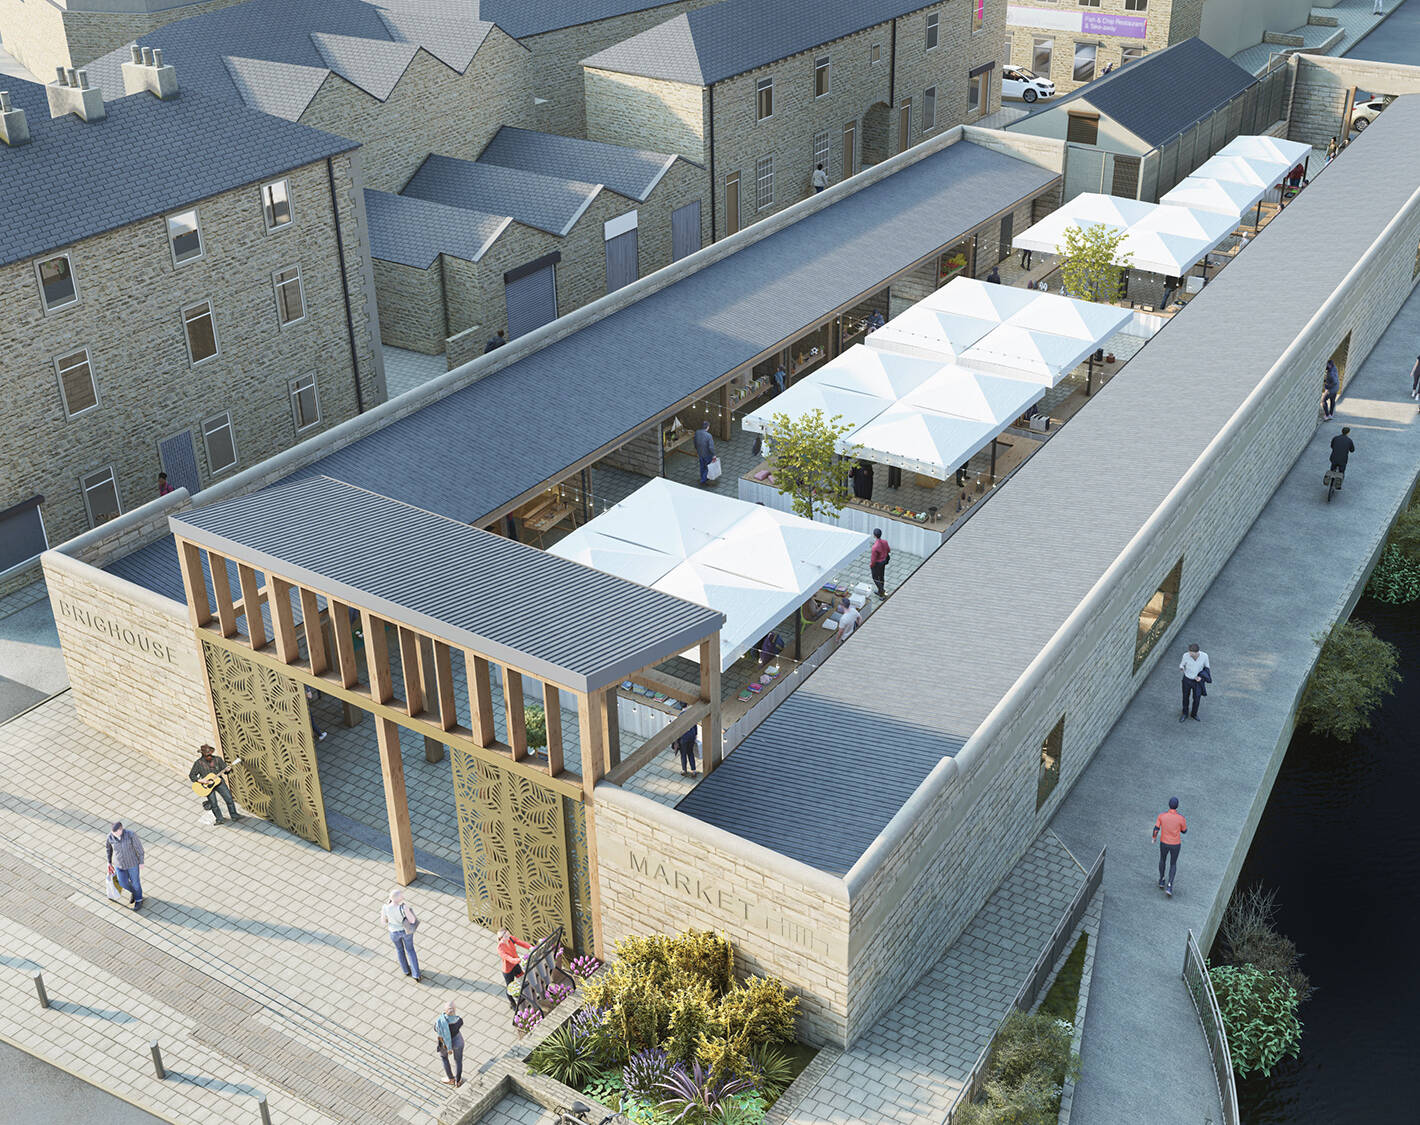 Artist's impression of the new Brighouse market